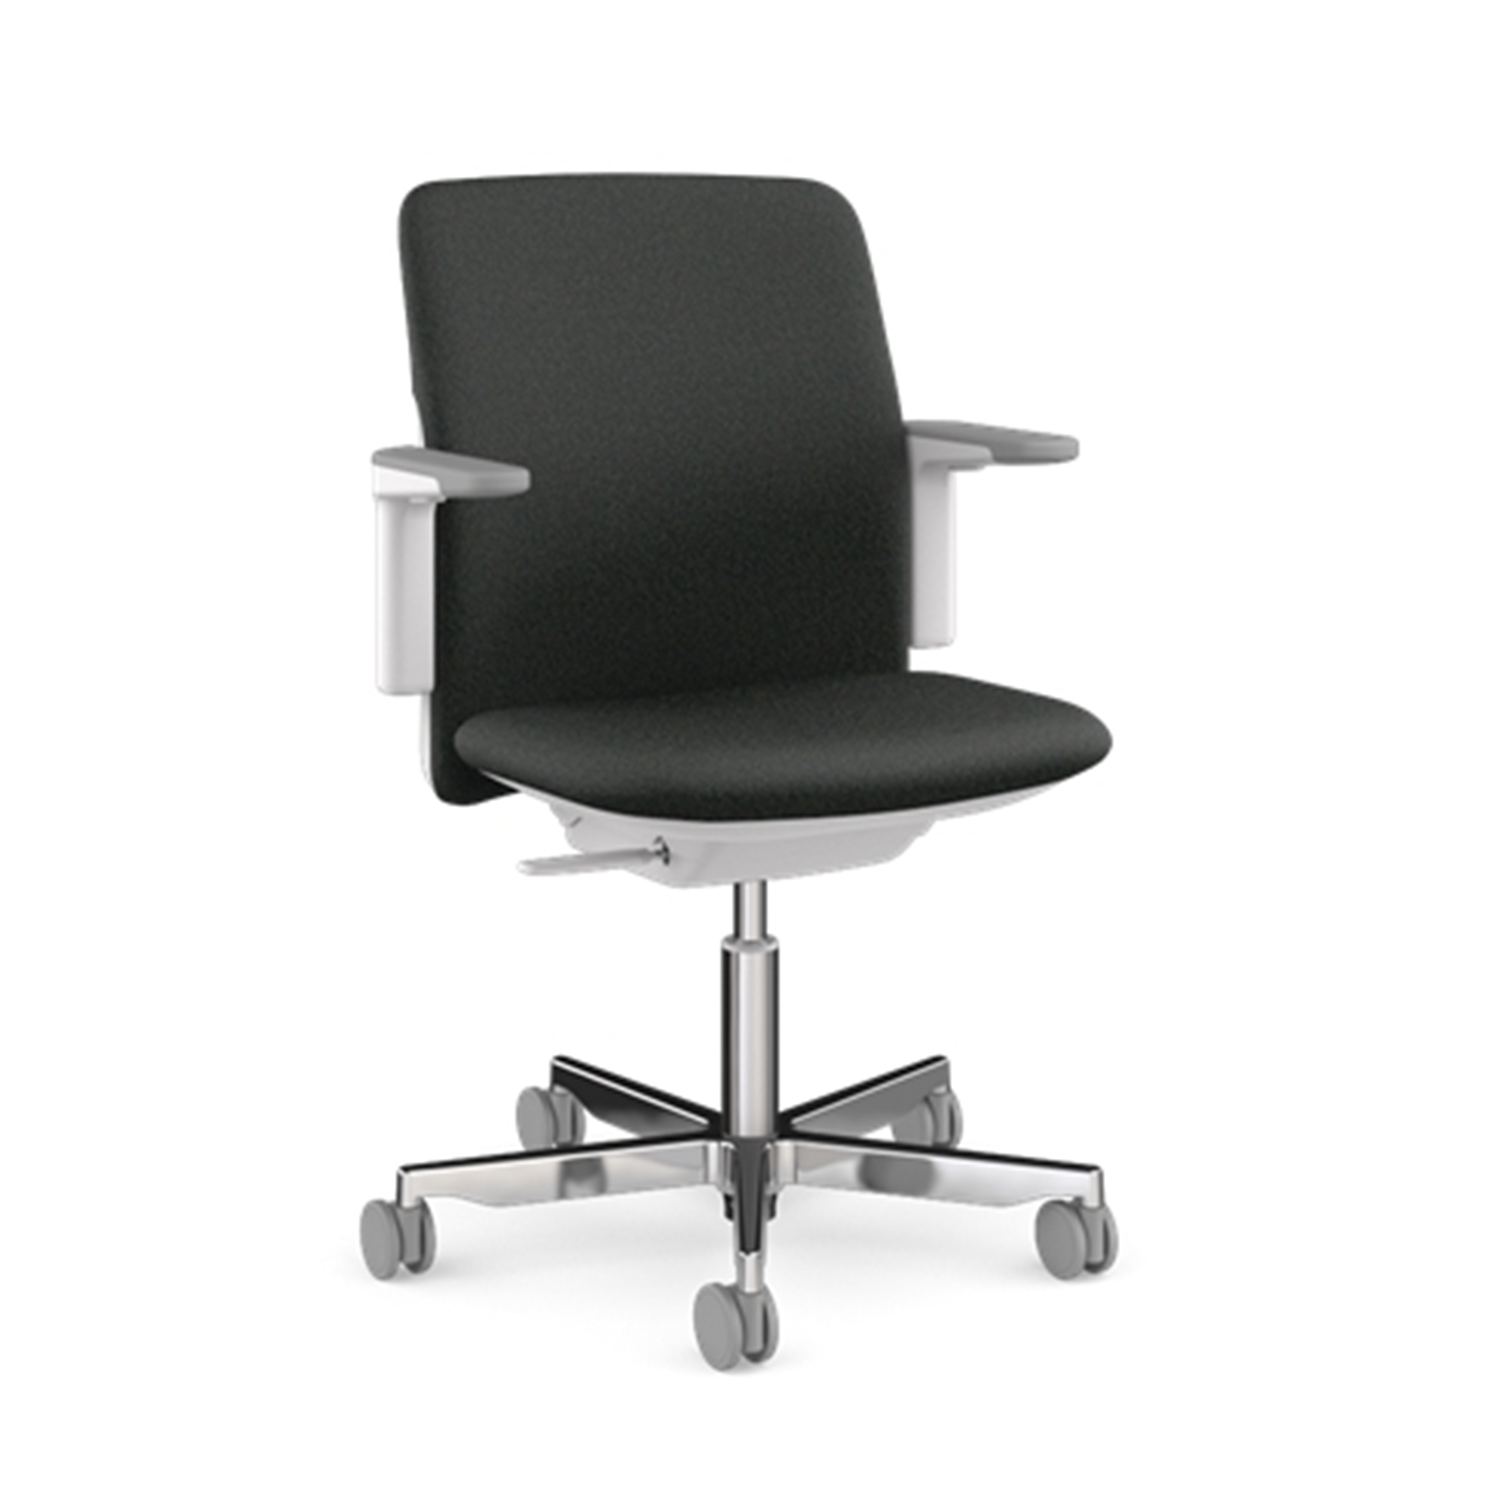 Humanscale Path Upholstered Swivel Desk Chair